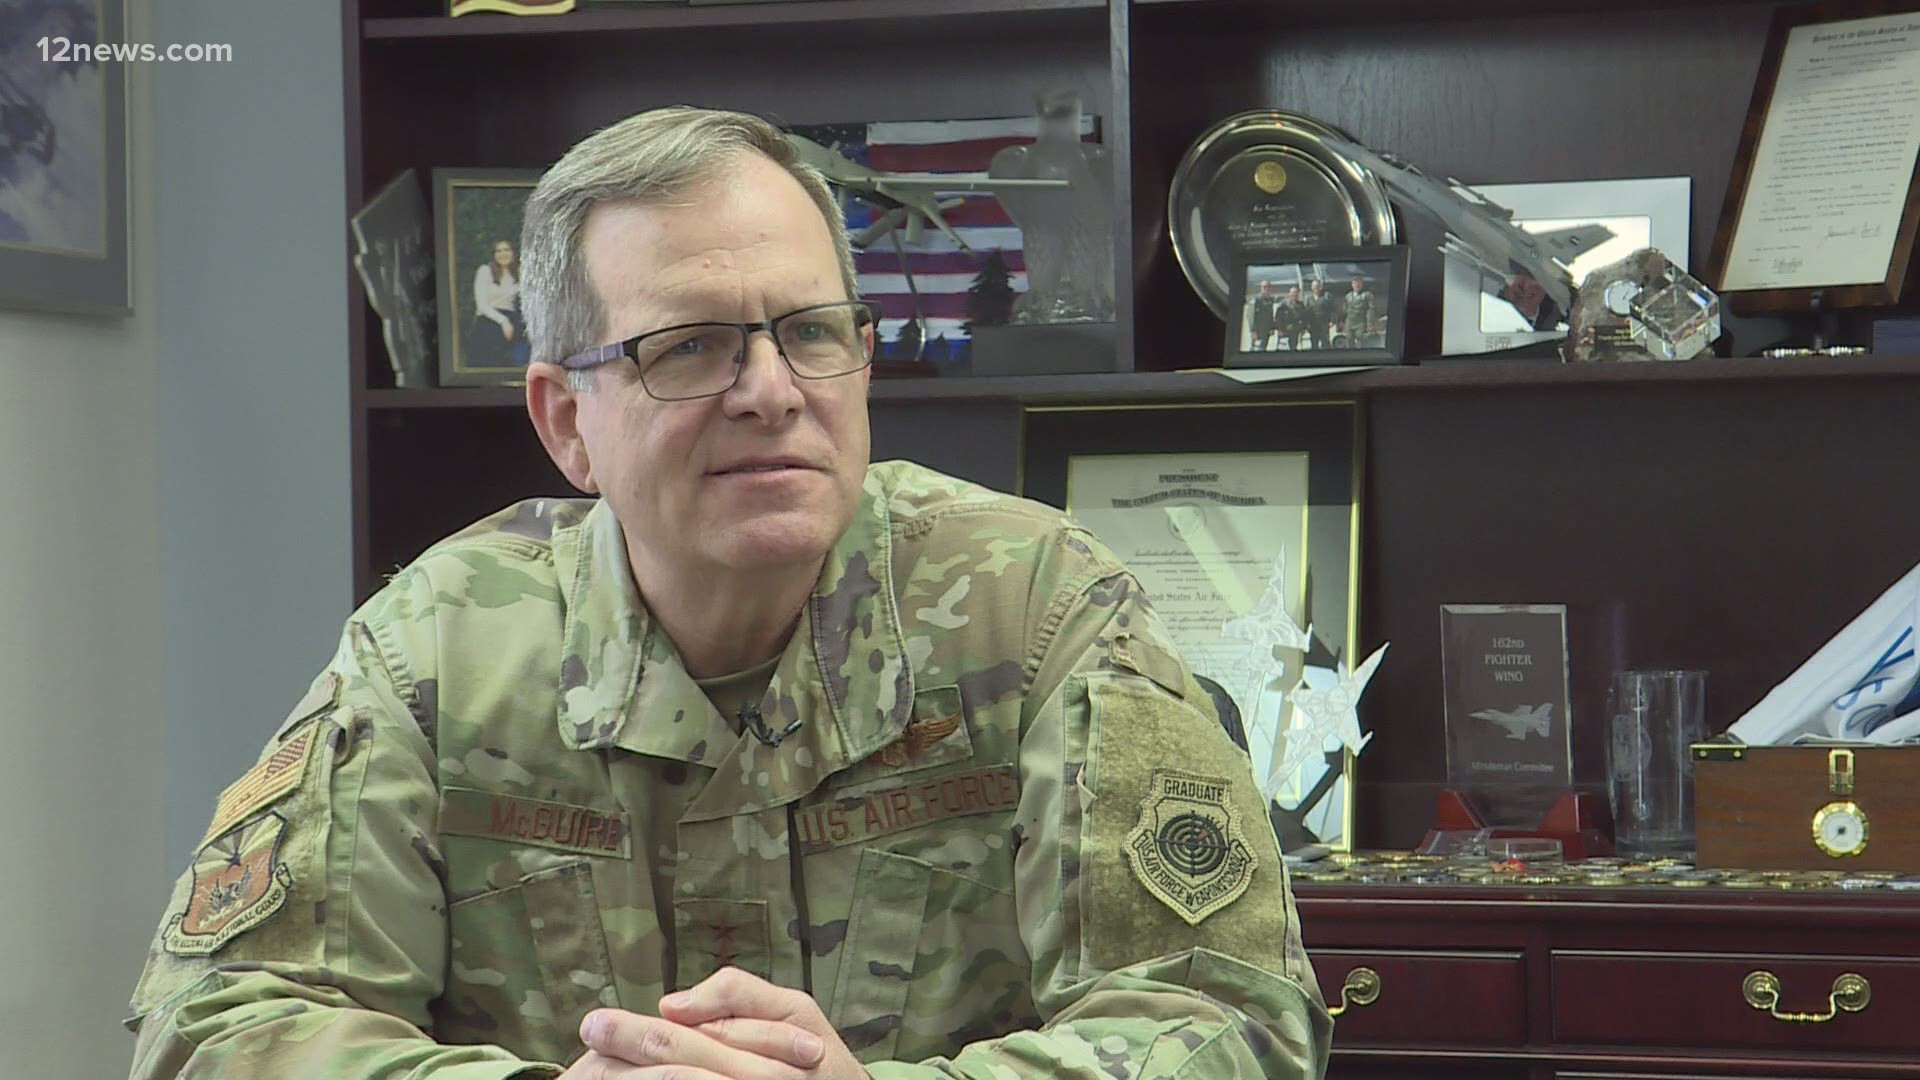 After three decades of service, General Michael T. McGuire, the head of the Arizona National Guard, is retiring. Here's a look back on his life and service.